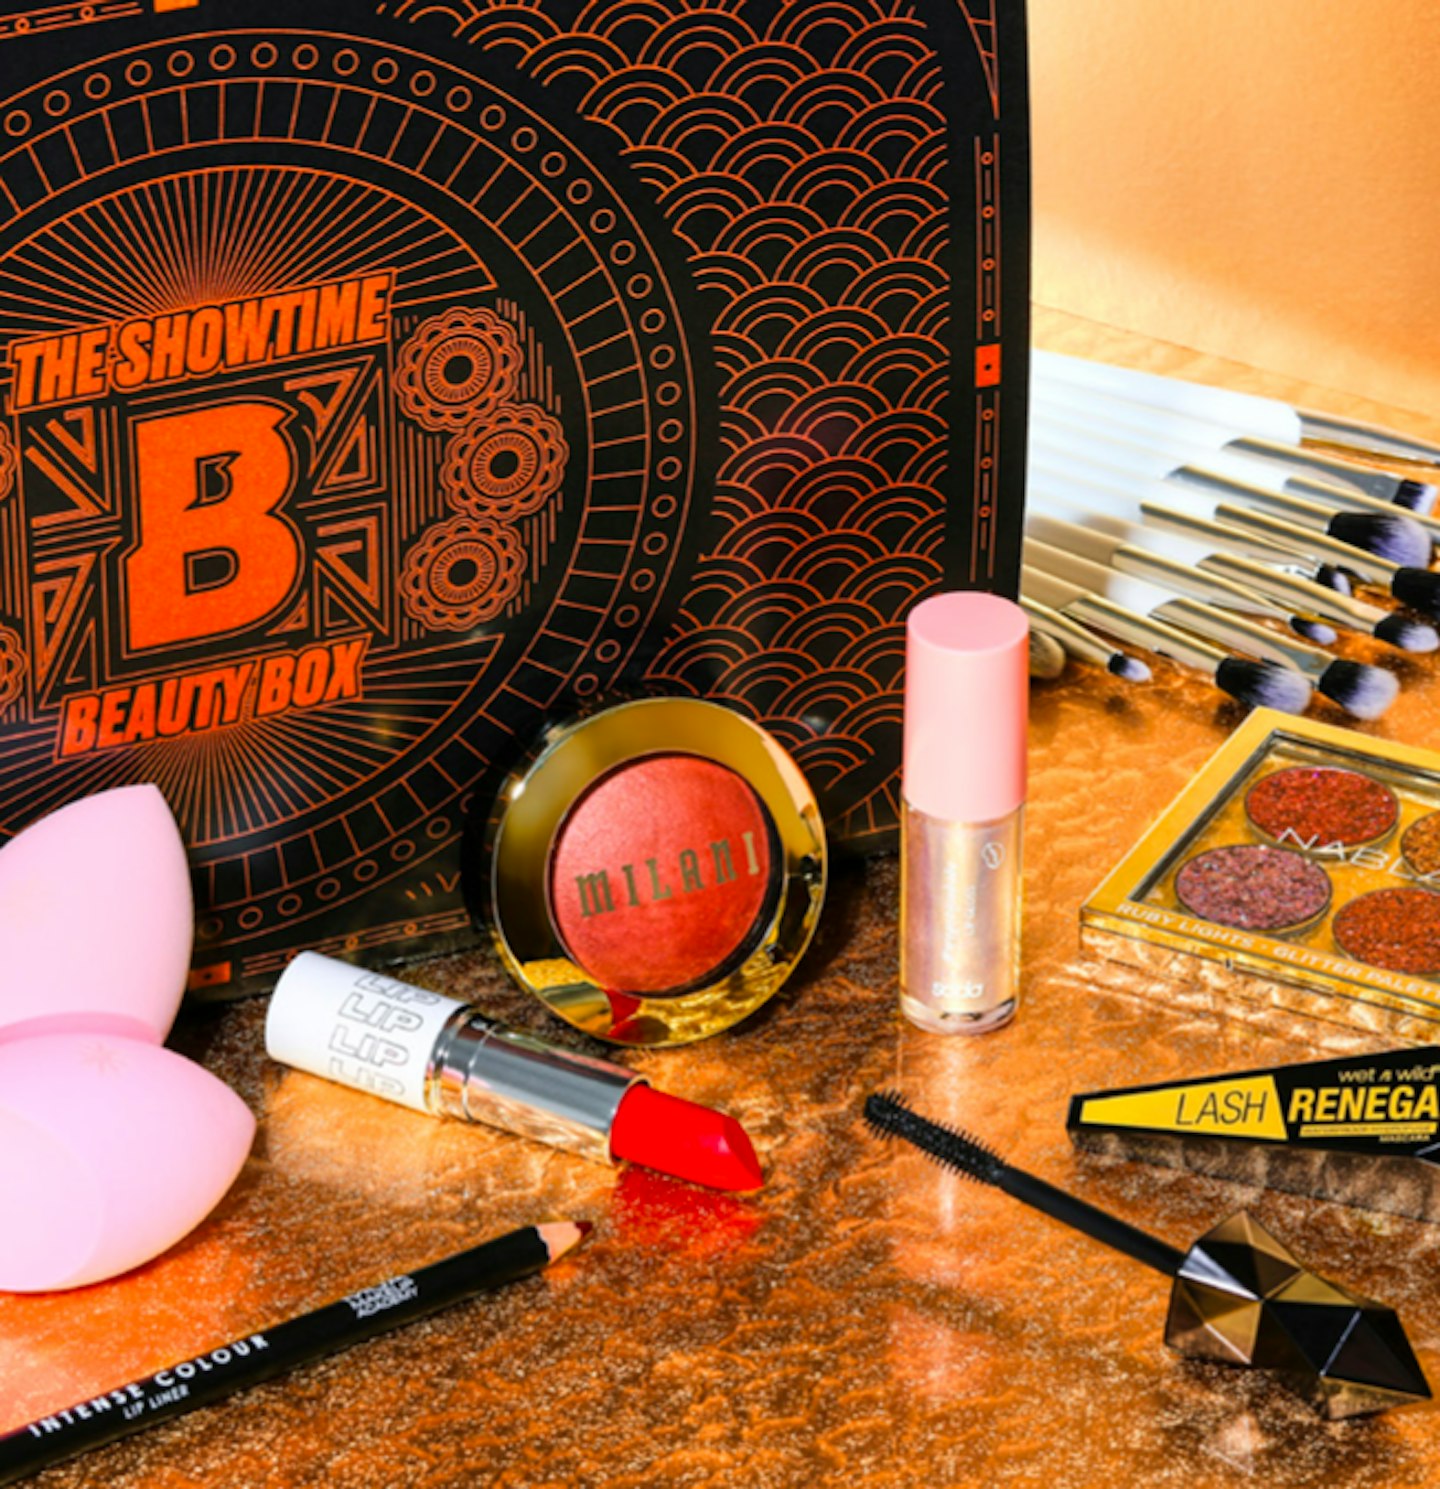 The Showtime Beauty Box